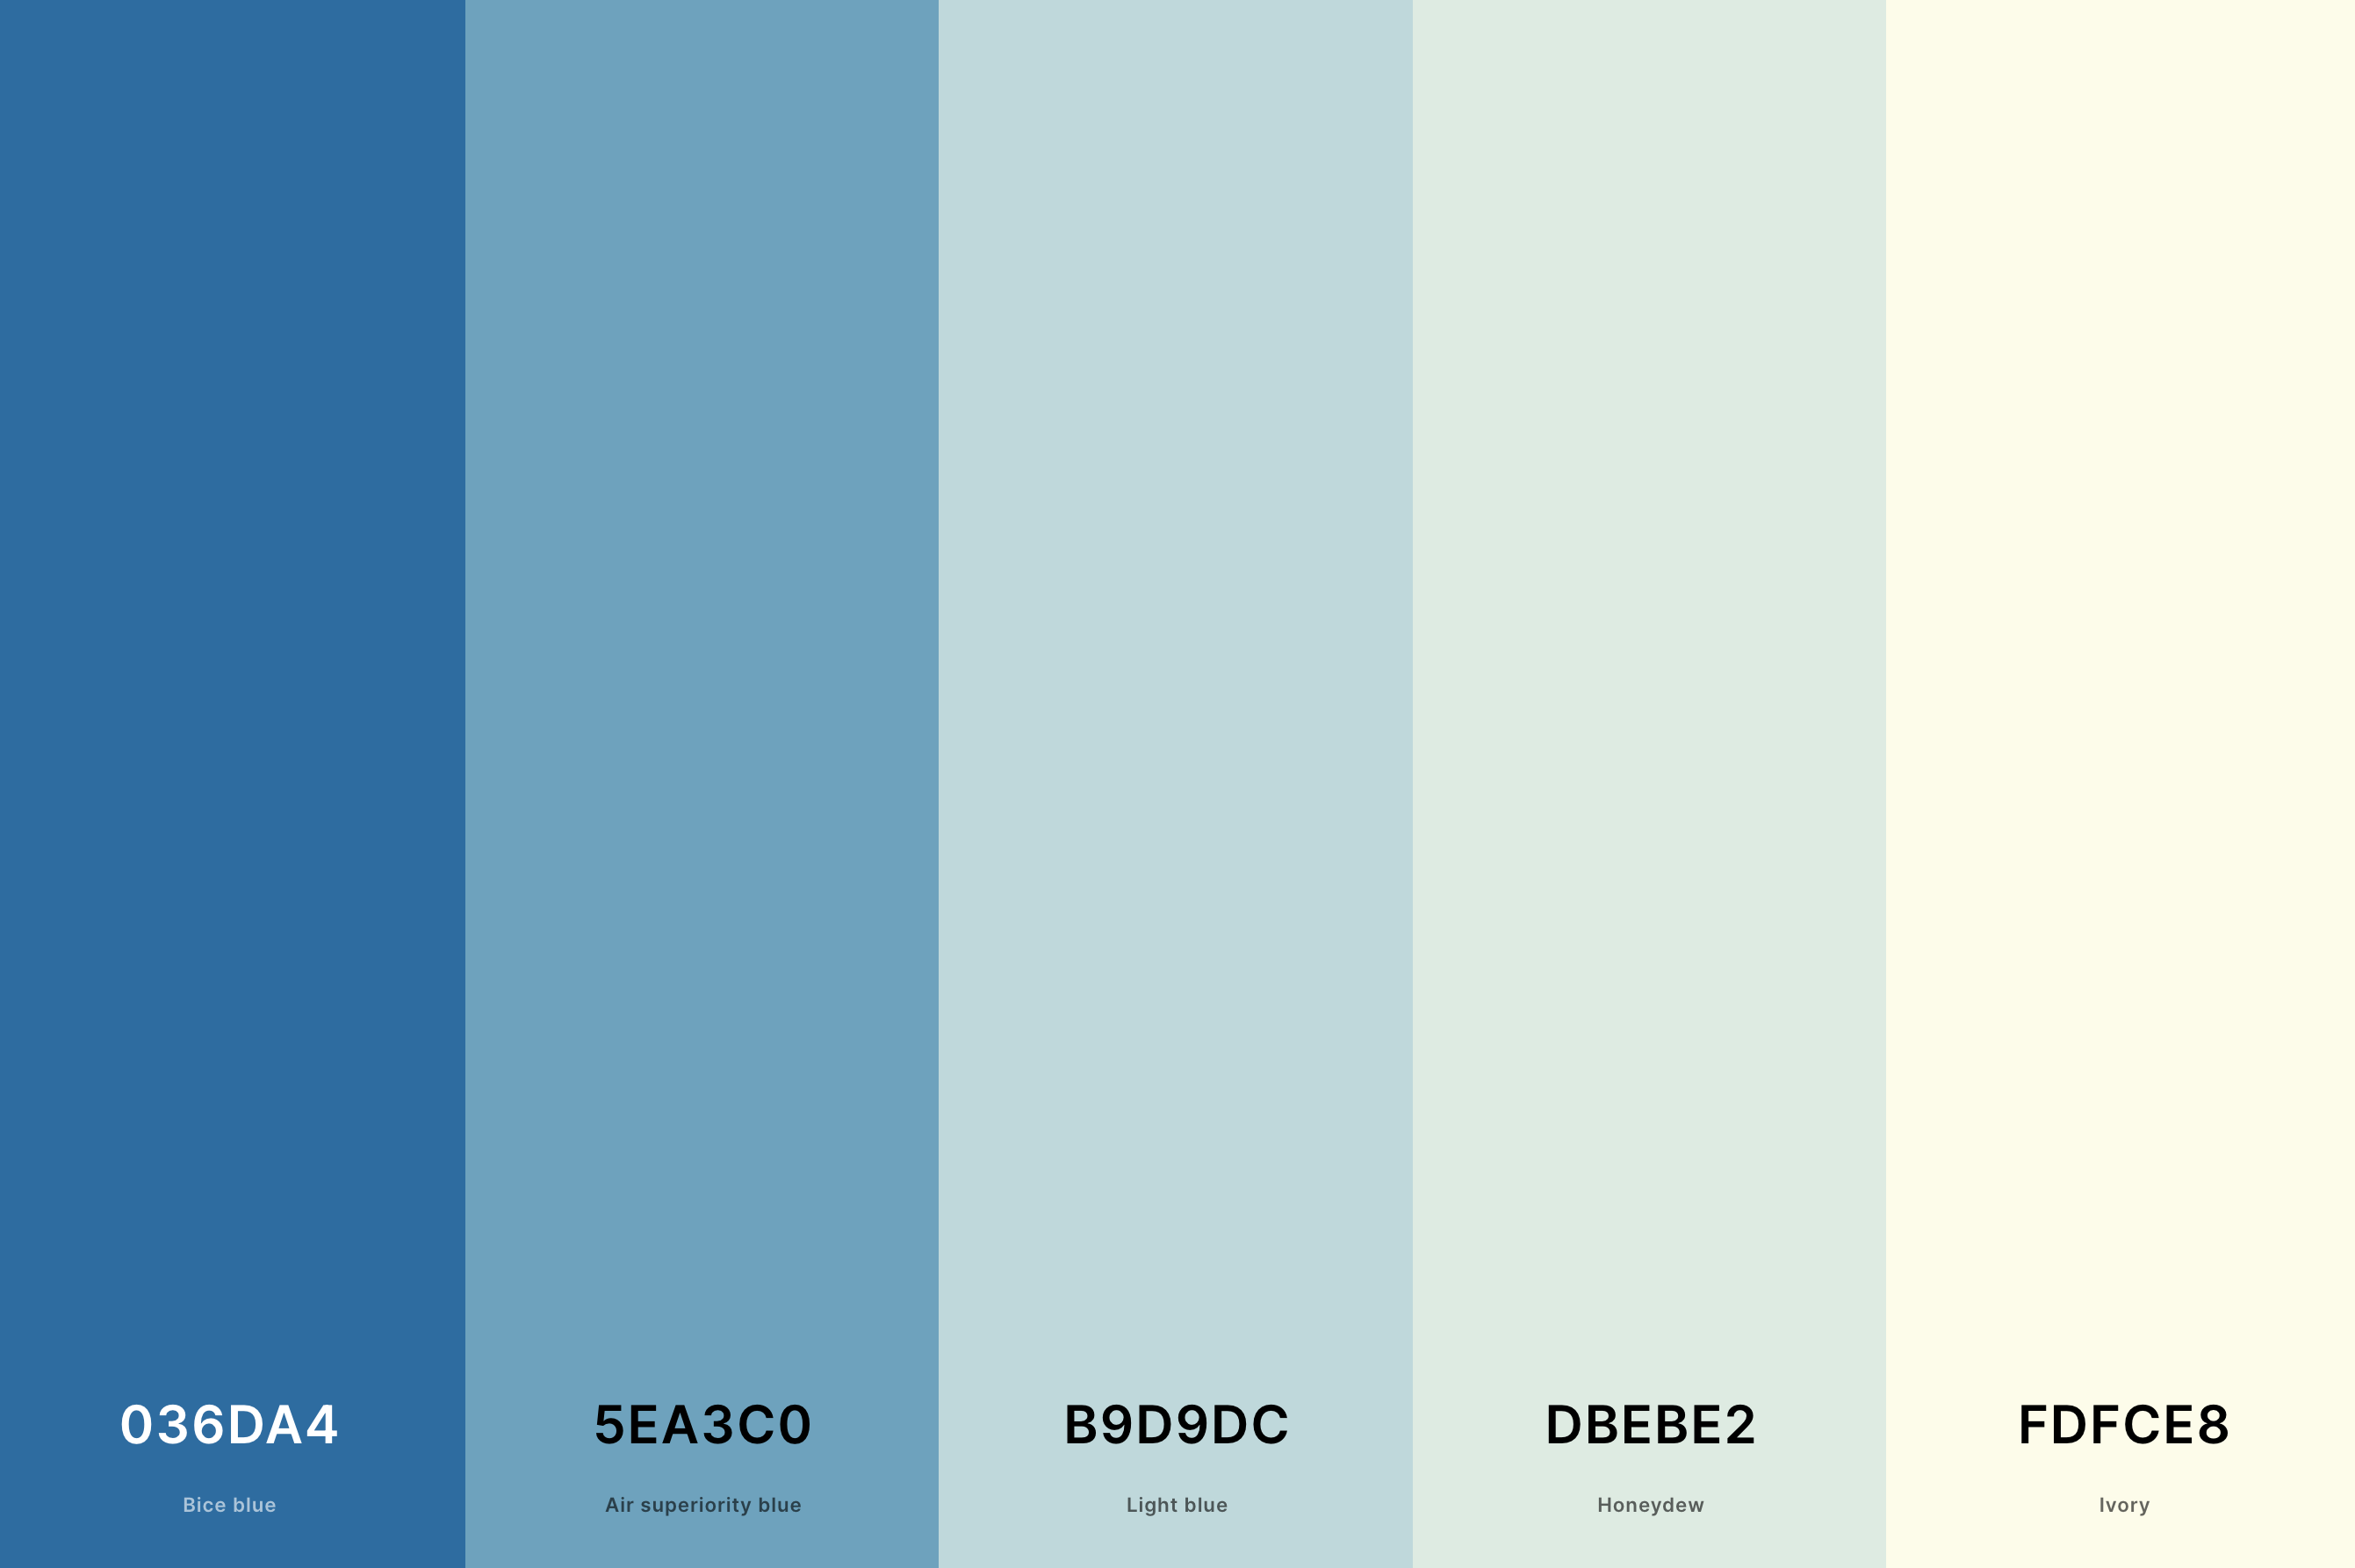 5. Blue And Cream Color Palette Color Palette with Bice Blue (Hex #036DA4) + Air Superiority Blue (Hex #5EA3C0) + Light Blue (Hex #B9D9DC) + Honeydew (Hex #DBEBE2) + Ivory (Hex #FDFCE8) Color Palette with Hex Codes